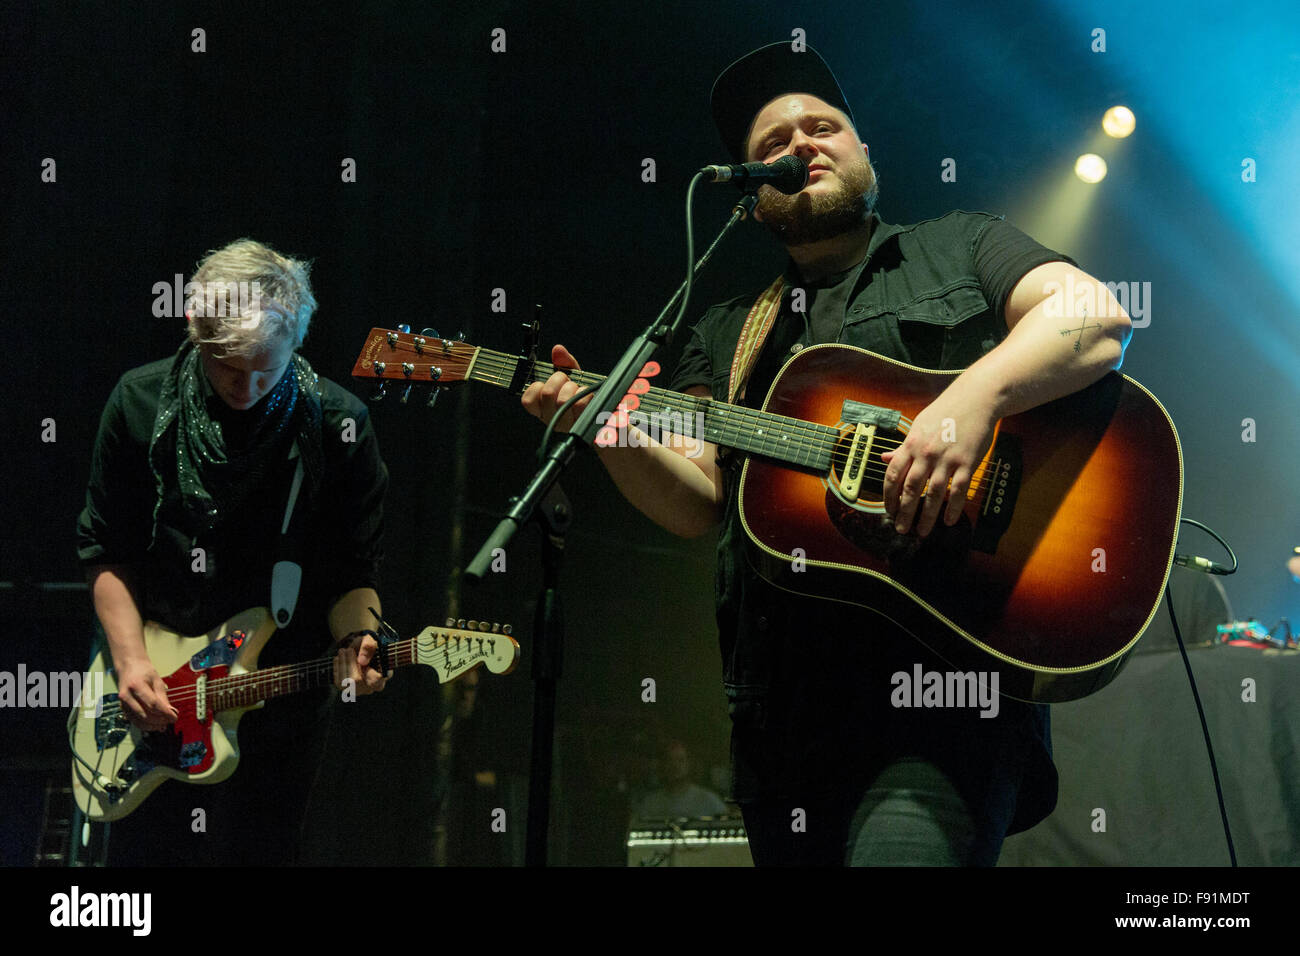 Milwaukee, Wisconsin, USA. 11th Dec, 2015. Musician RAGNAR PORHALLSSON (R) and BRYNJAR LEIFSSON from Of Monsters and Men perform live on stage during the FM 102/1 Big Snow Show X at Eagles Ballroom/The Rave in Milwaukee, Wisconsin © Daniel DeSlover/ZUMA Wire/Alamy Live News Stock Photo